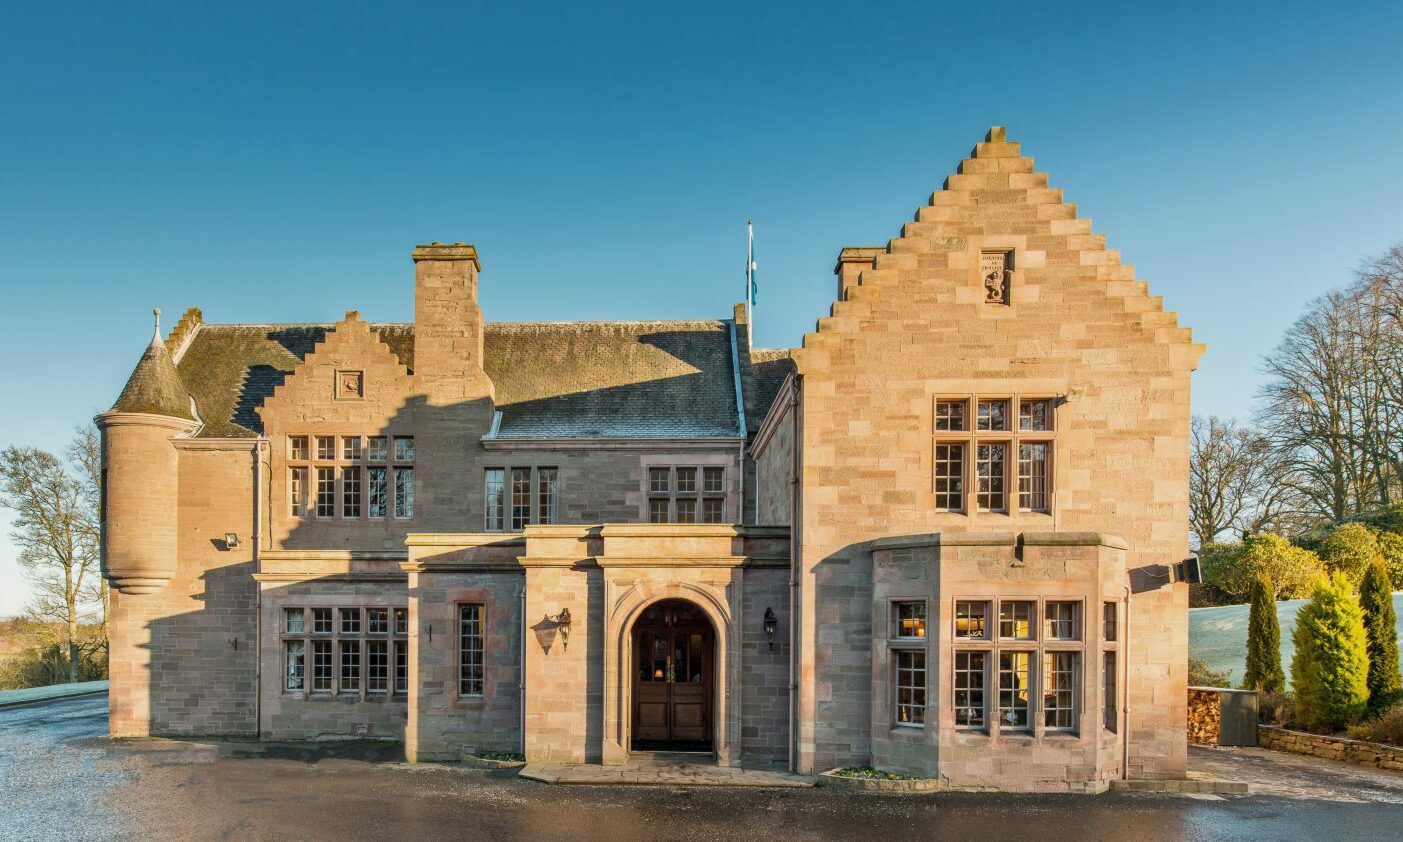 Murrayshall Country Estate in Perthshire has plans for a £30m upgrade.